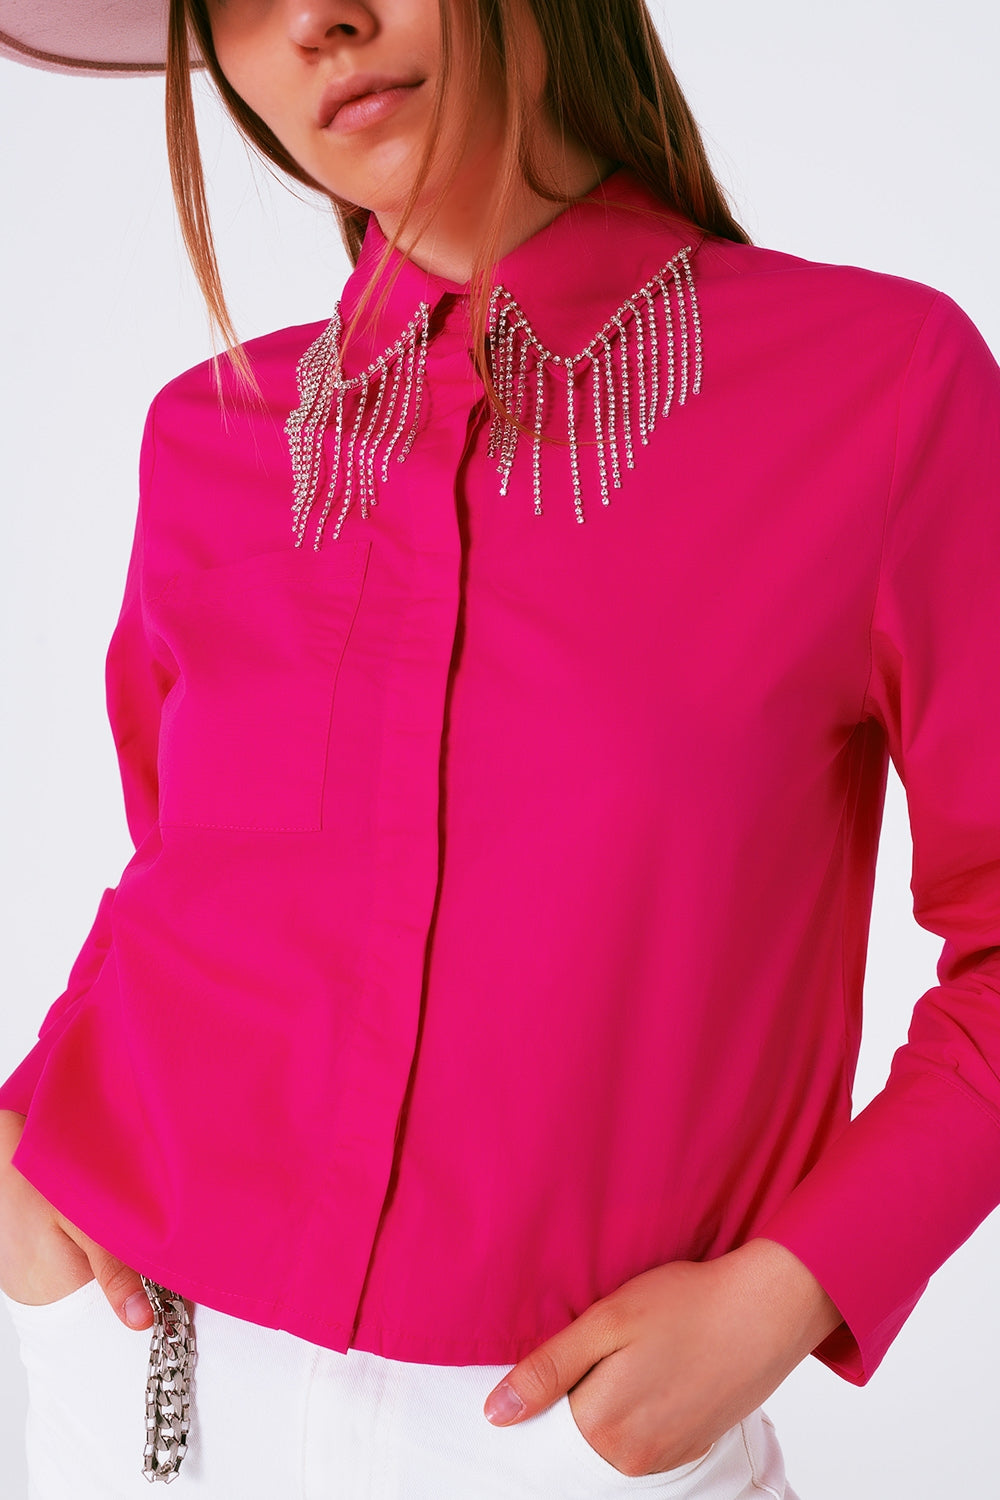 Shirt With Fringe strass Collar in Fuxia - Szua Store